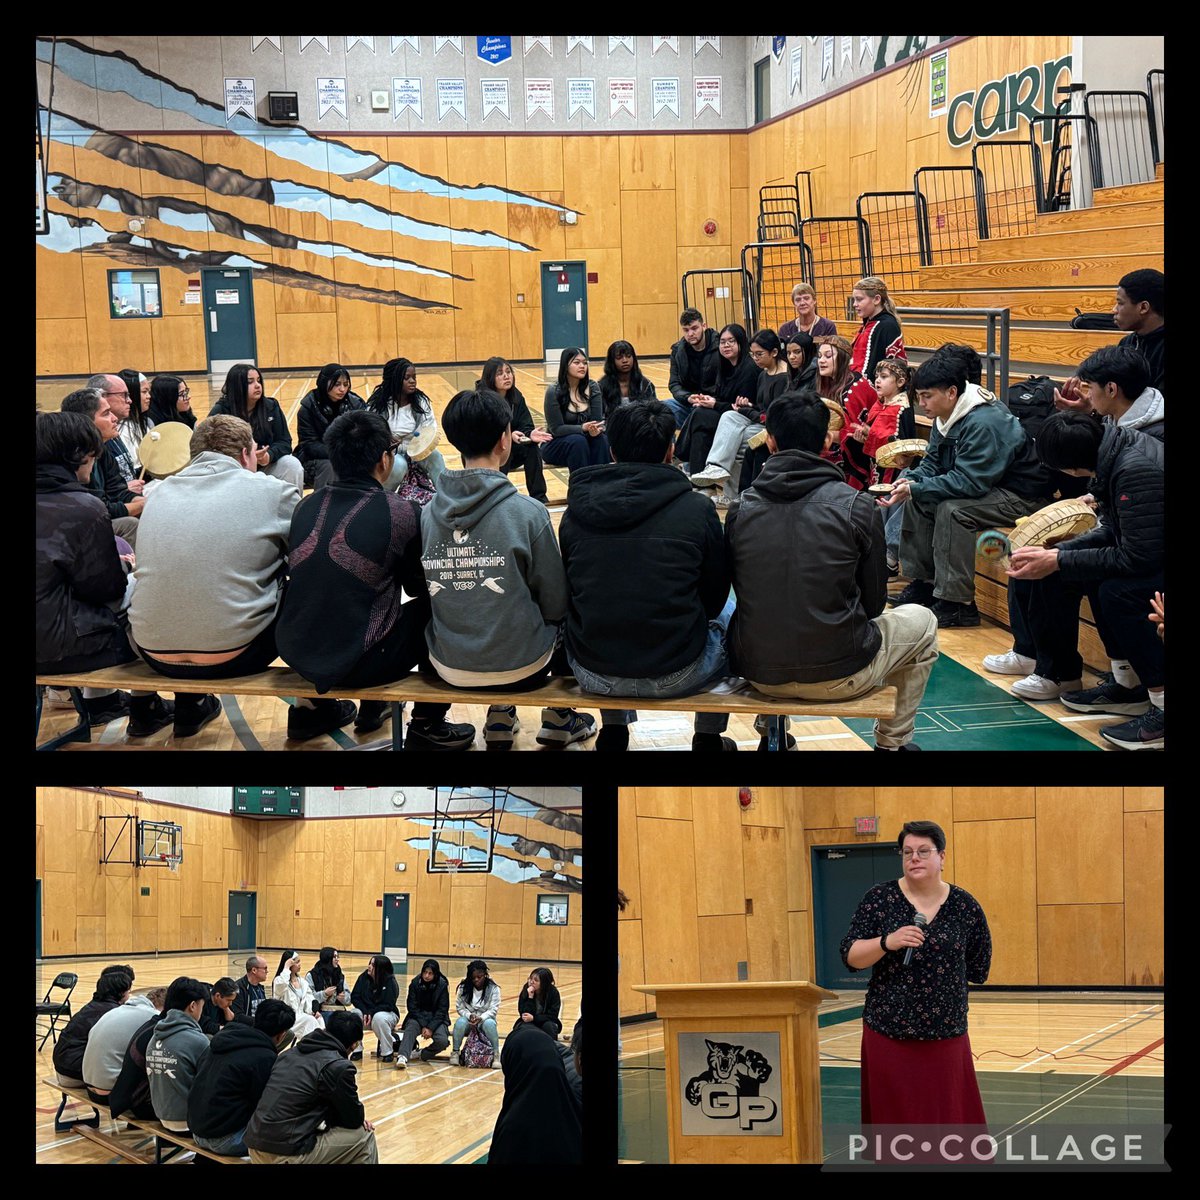 GP hosted First Peoples in Residence this week. Students learned about Indigenous language, culture, art, storytelling, poetry, film & drumming . Thank you to the cultural facilitators, Indigenous speakers, & witnesses who shared their knowledge & truth with us. @Surrey_Schools